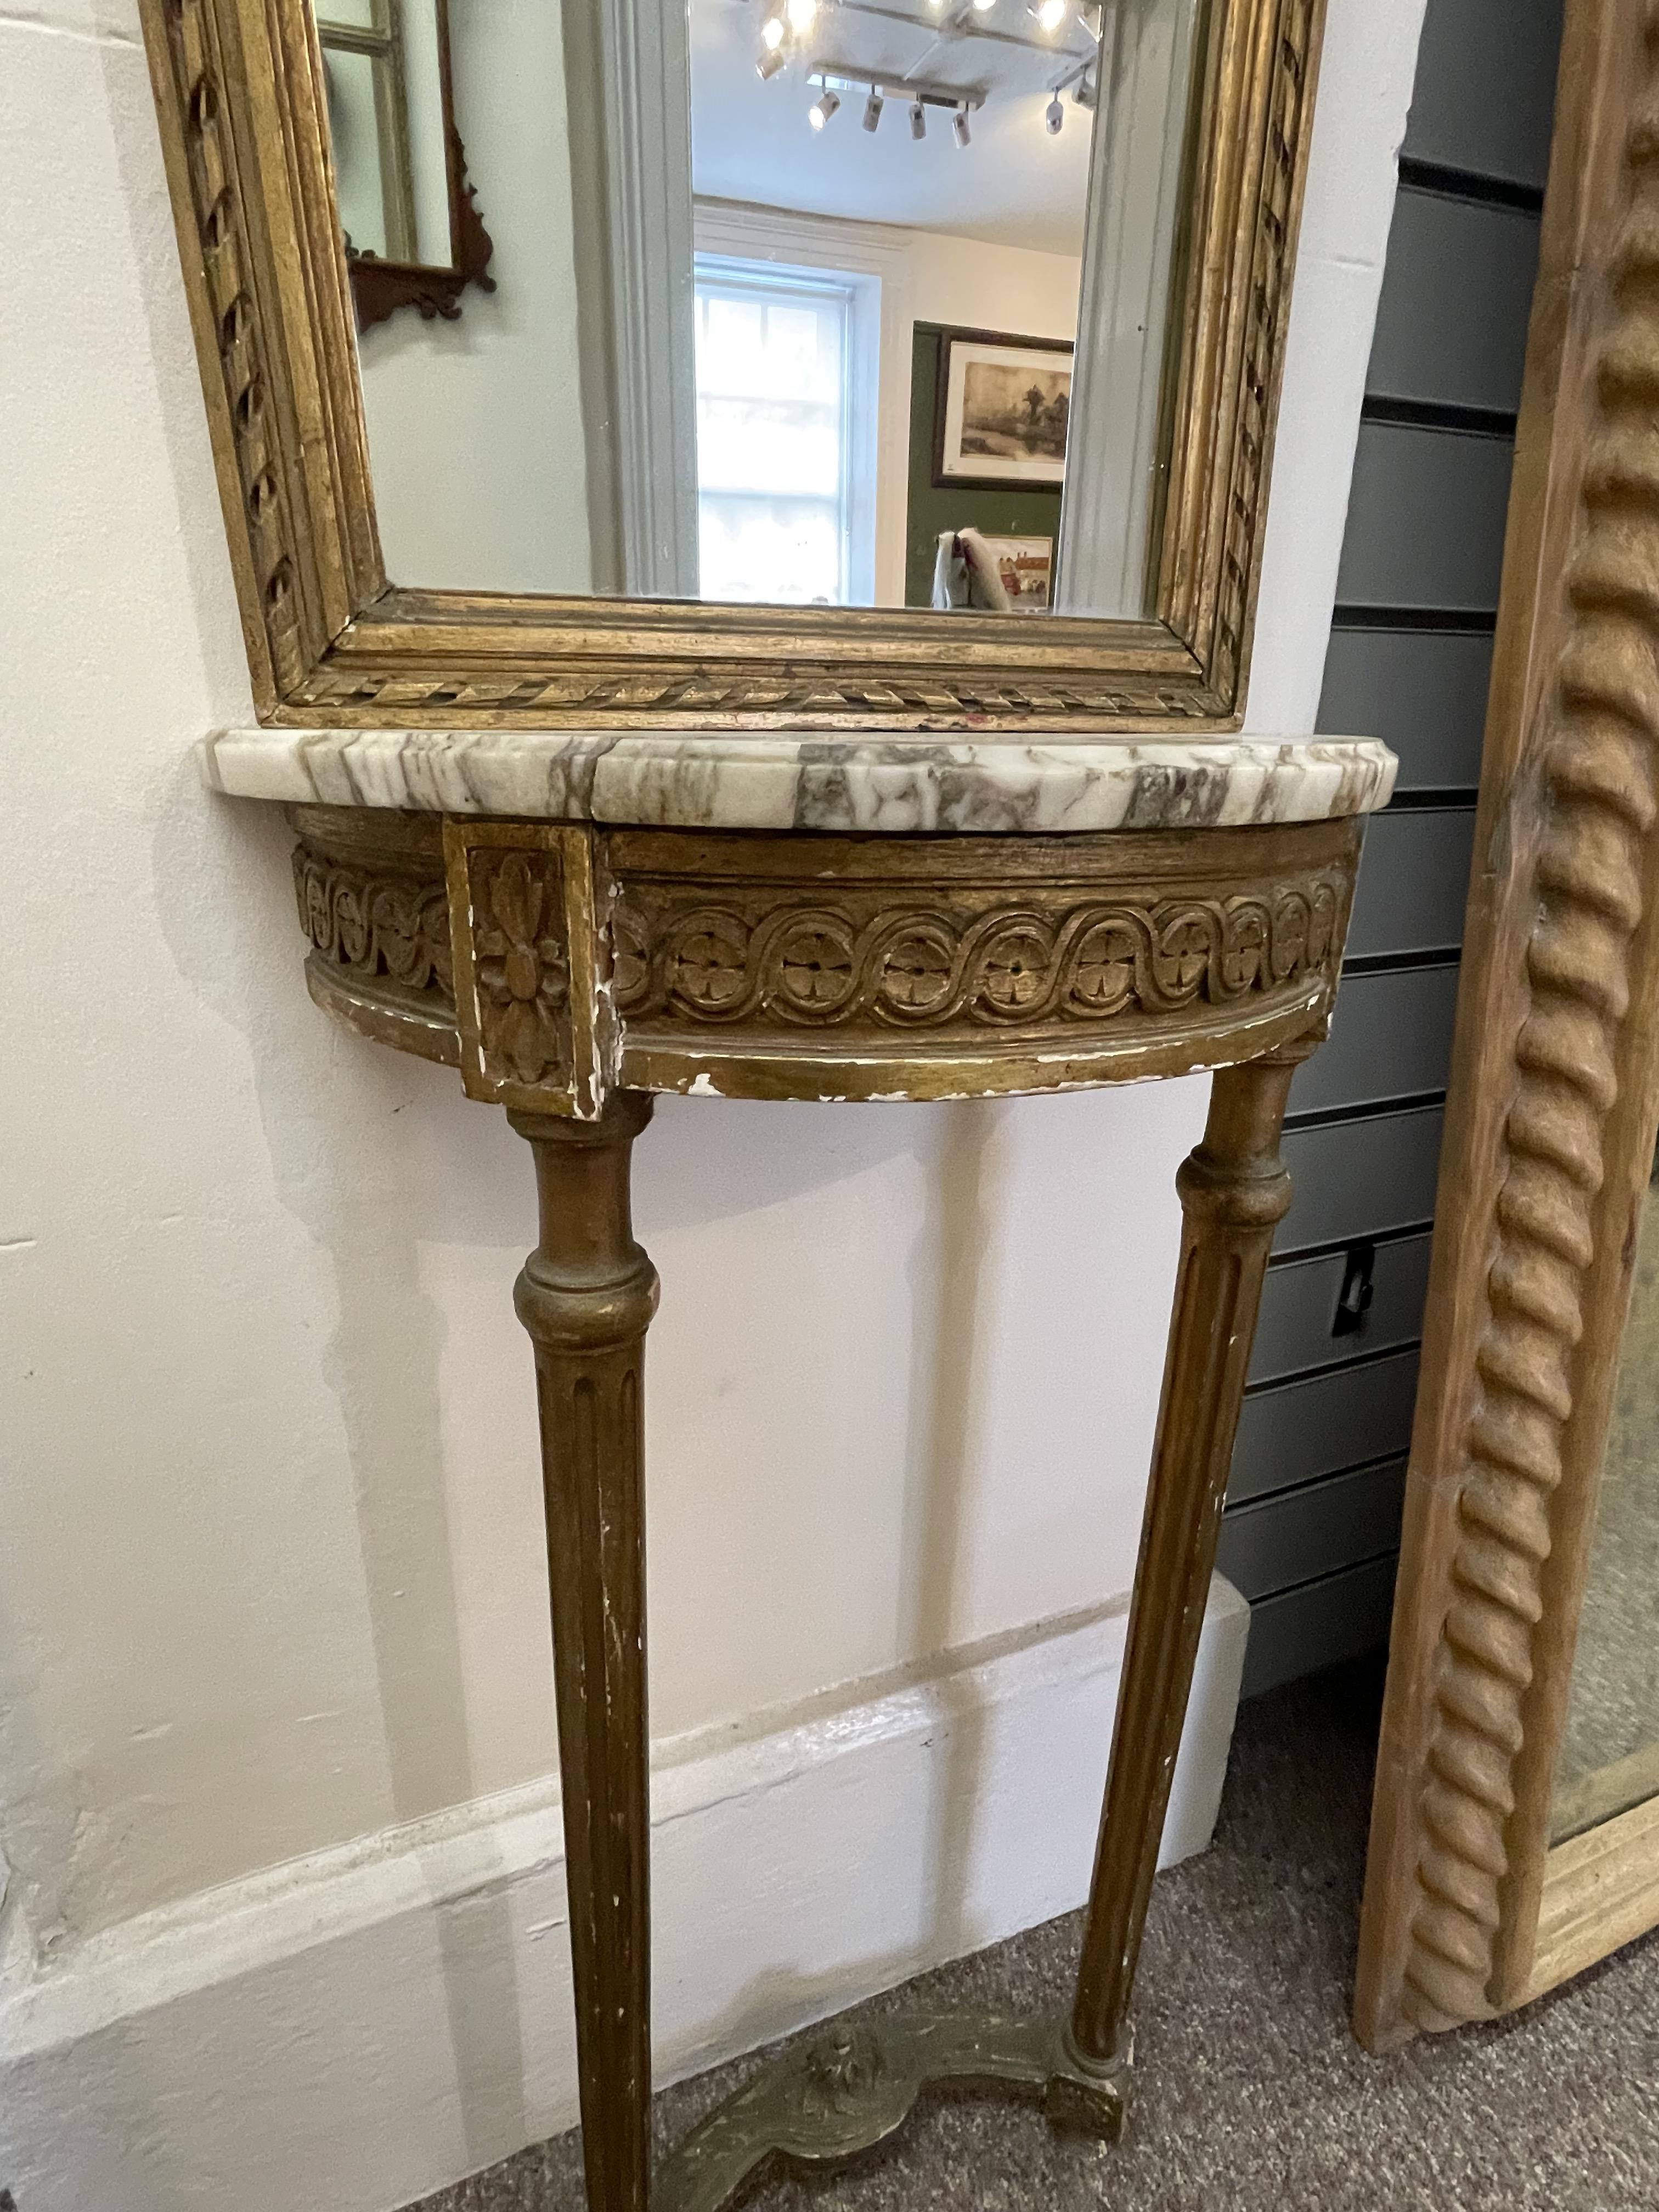 19th Century Marble Top Console Table And Mirror - Image 3 of 3